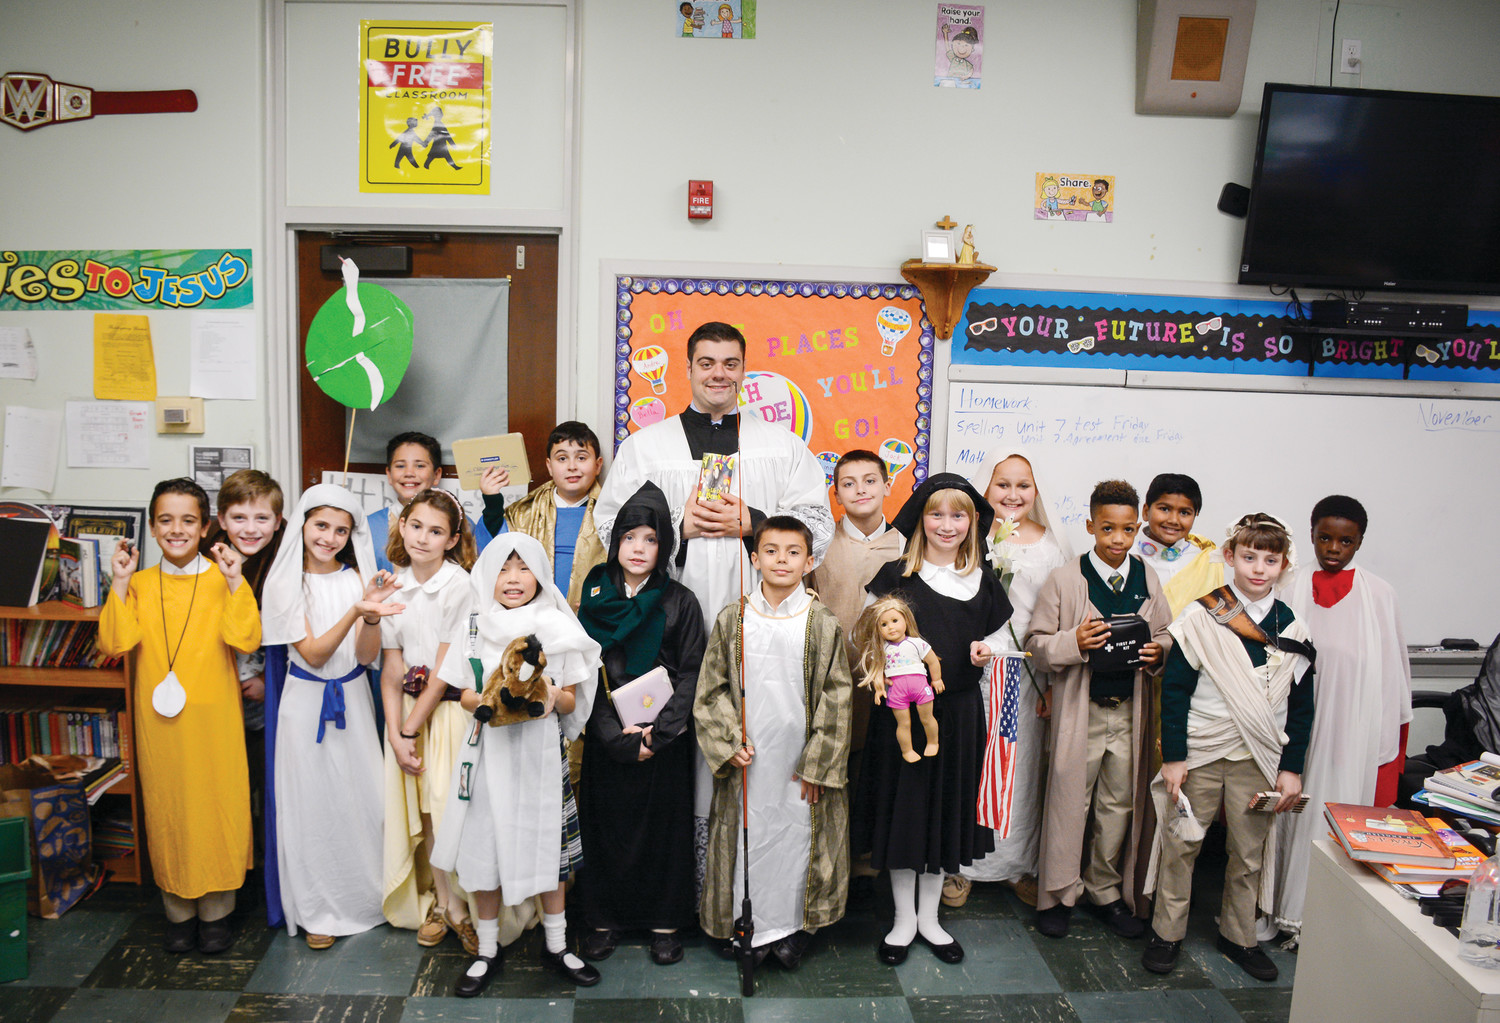 St. Augustine School teacher Ralph Cola, dressed as St. Benedict, joins his fourth grade class in representing their favorite saint. Students toured the school in costumes sharing facts about the life of the saints.